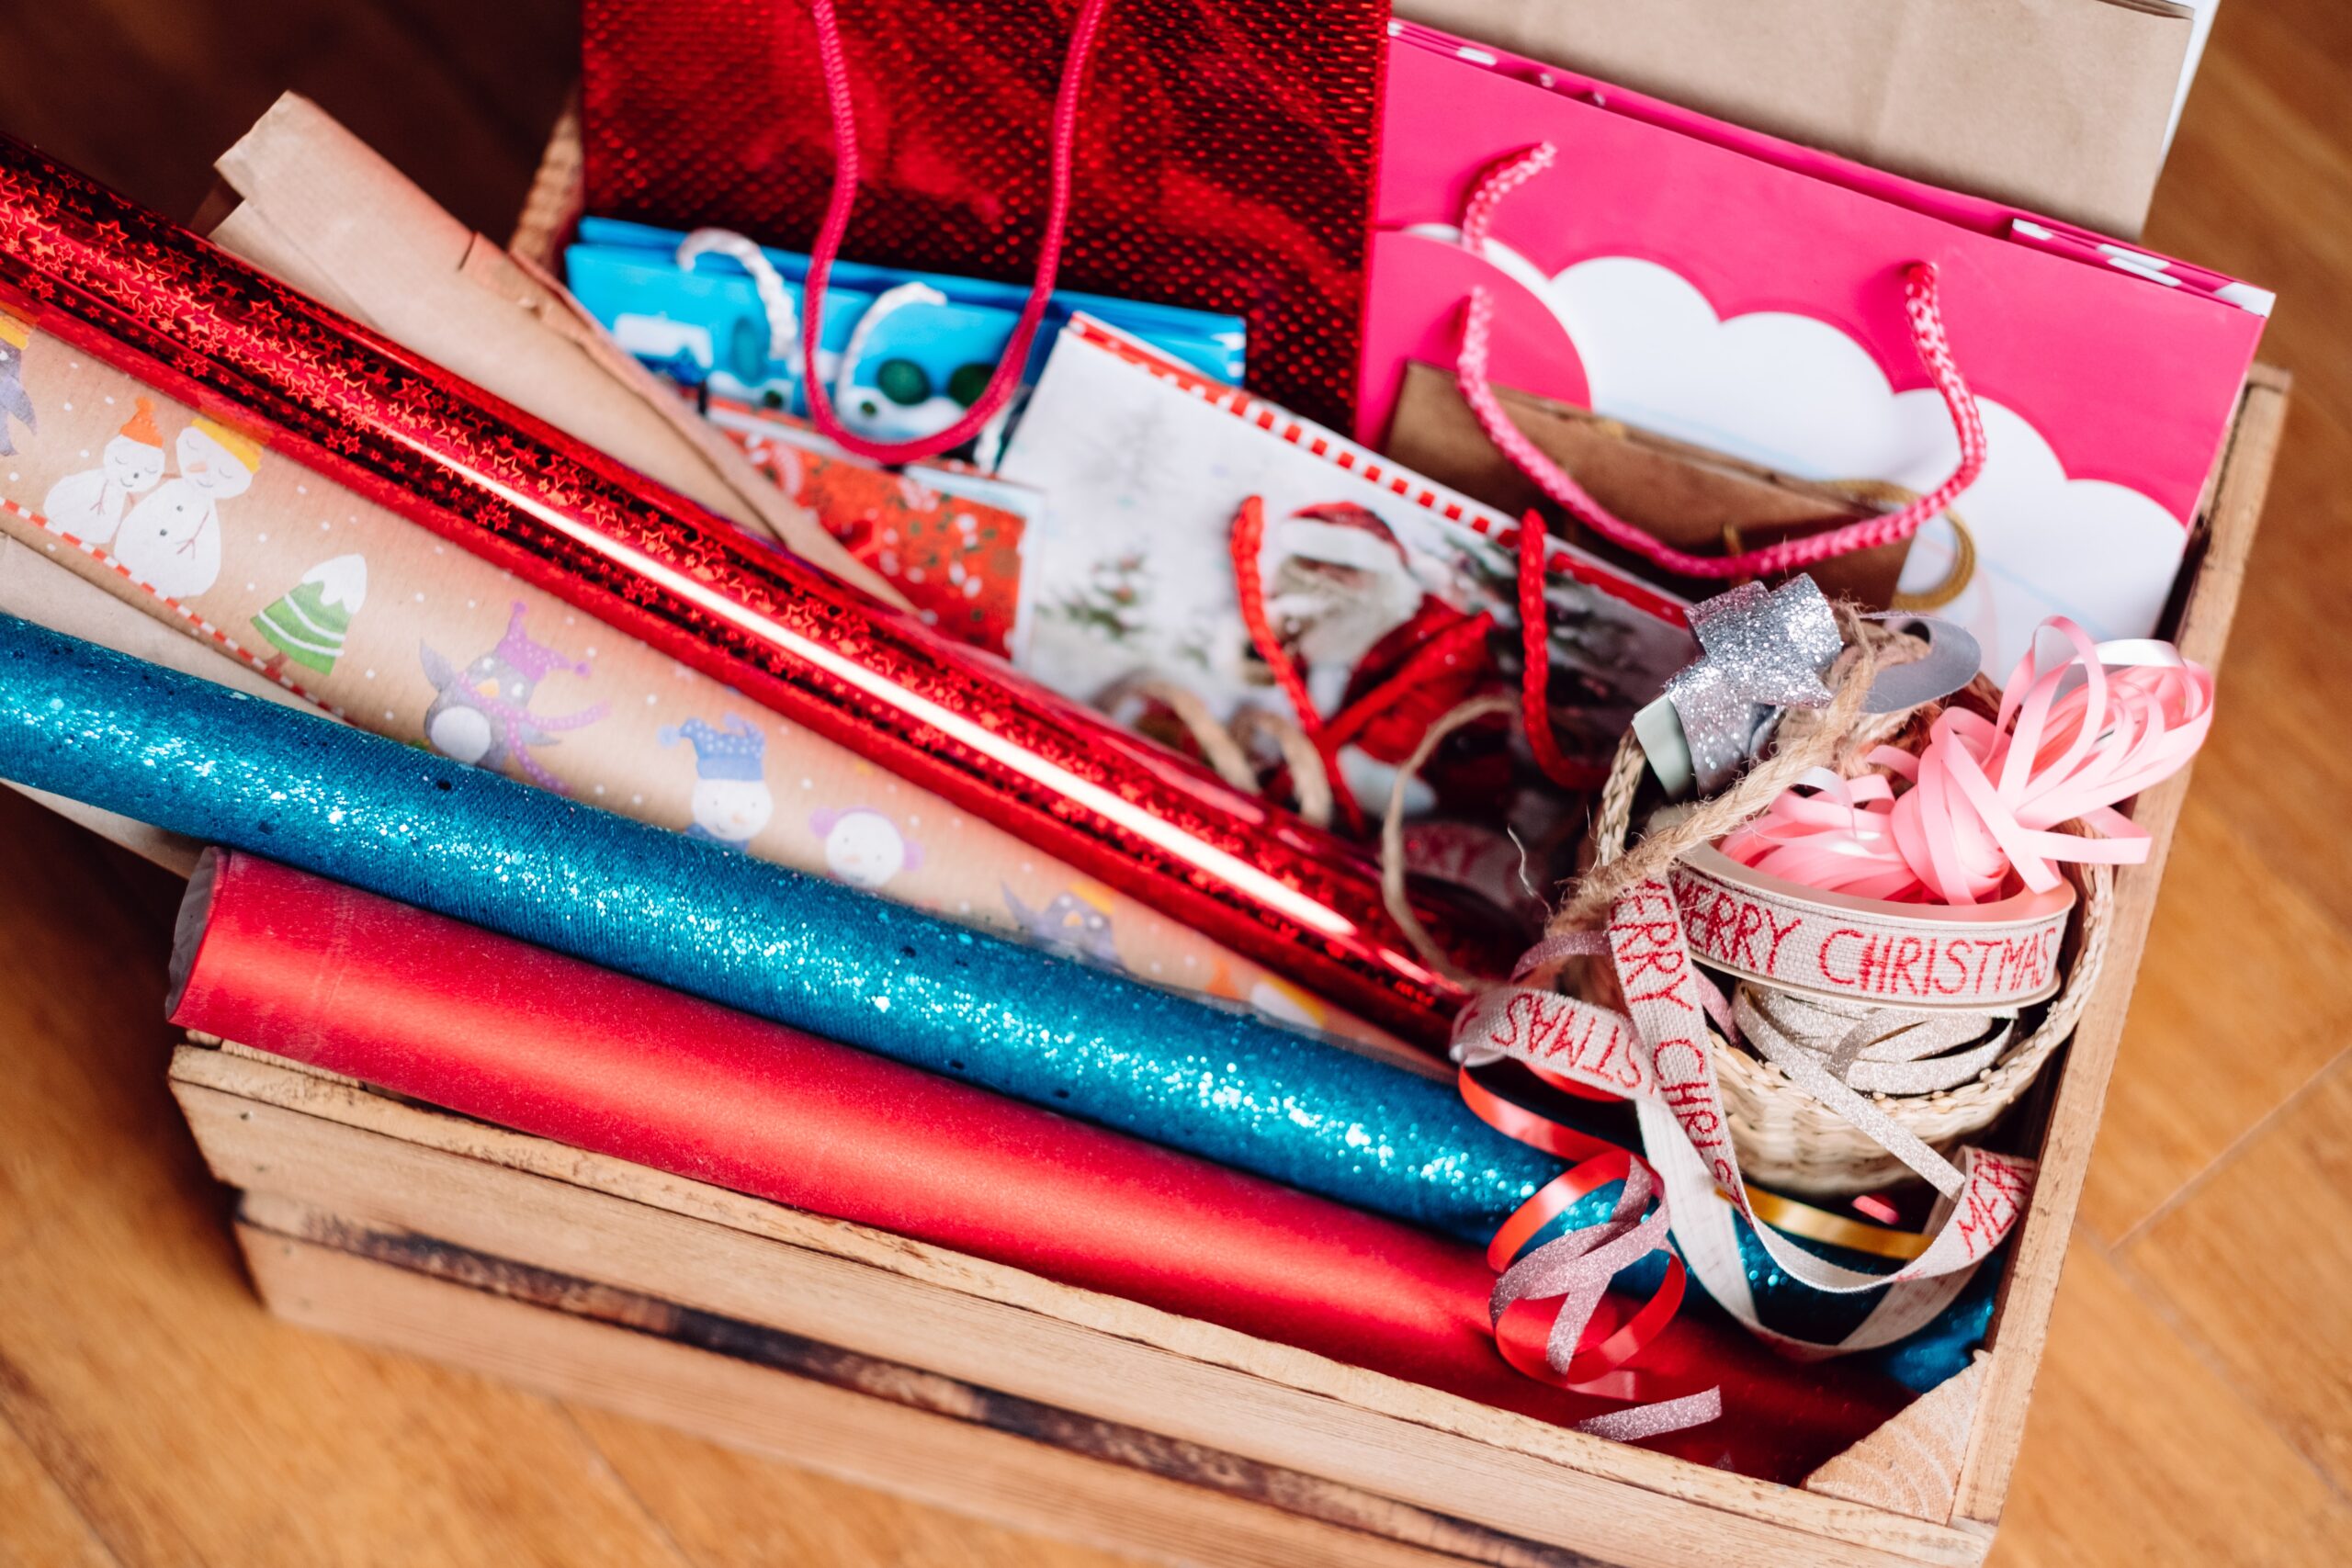 Gift wrapping supplies in a wooden crate